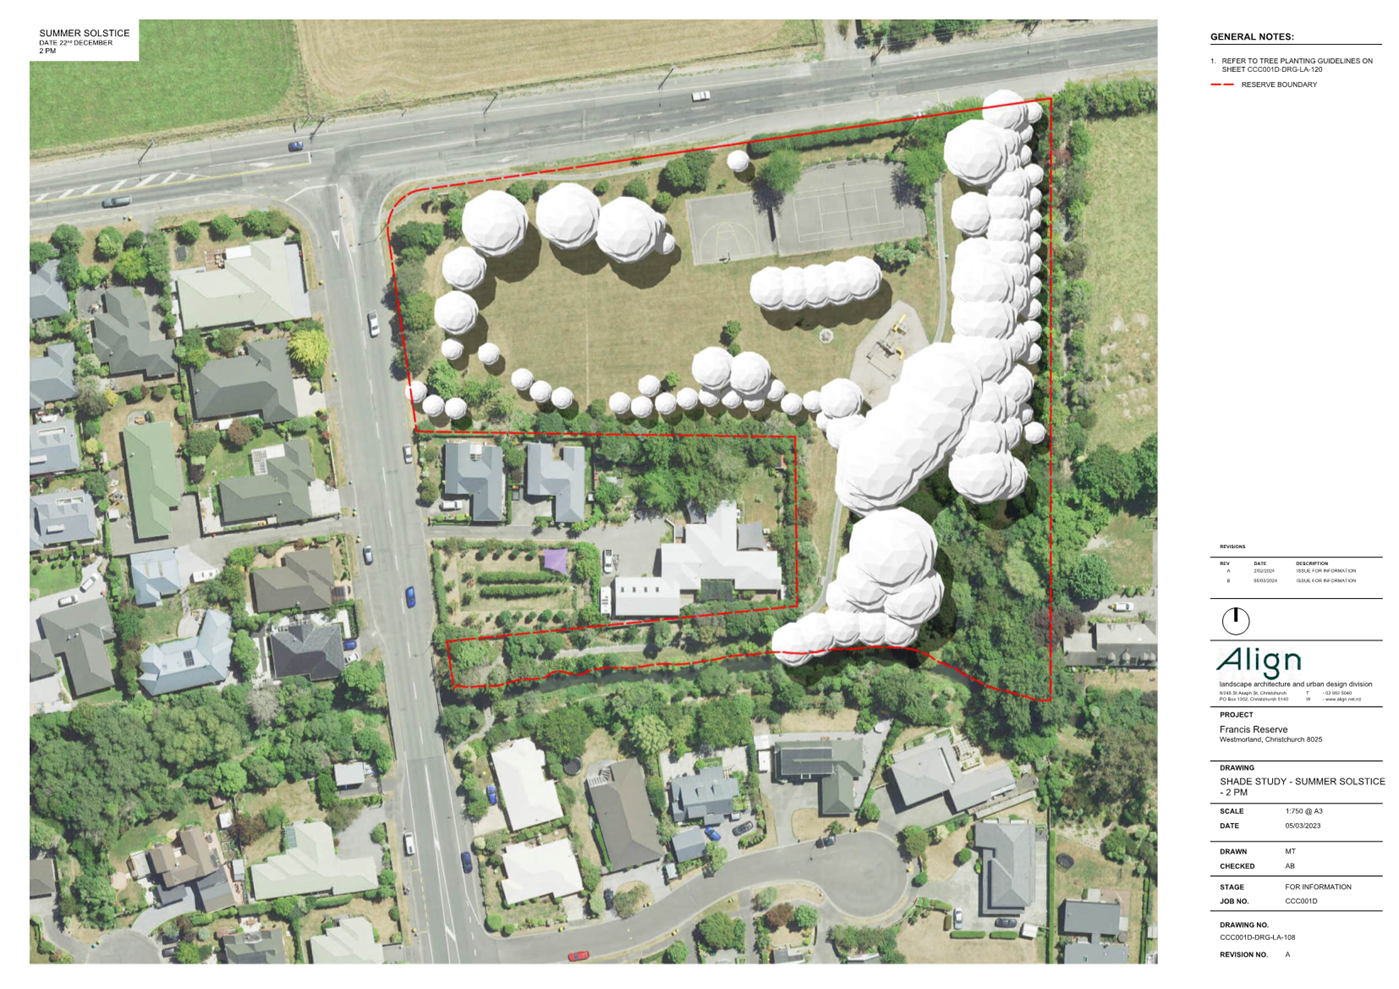 An aerial view of a neighborhood

Description automatically generated